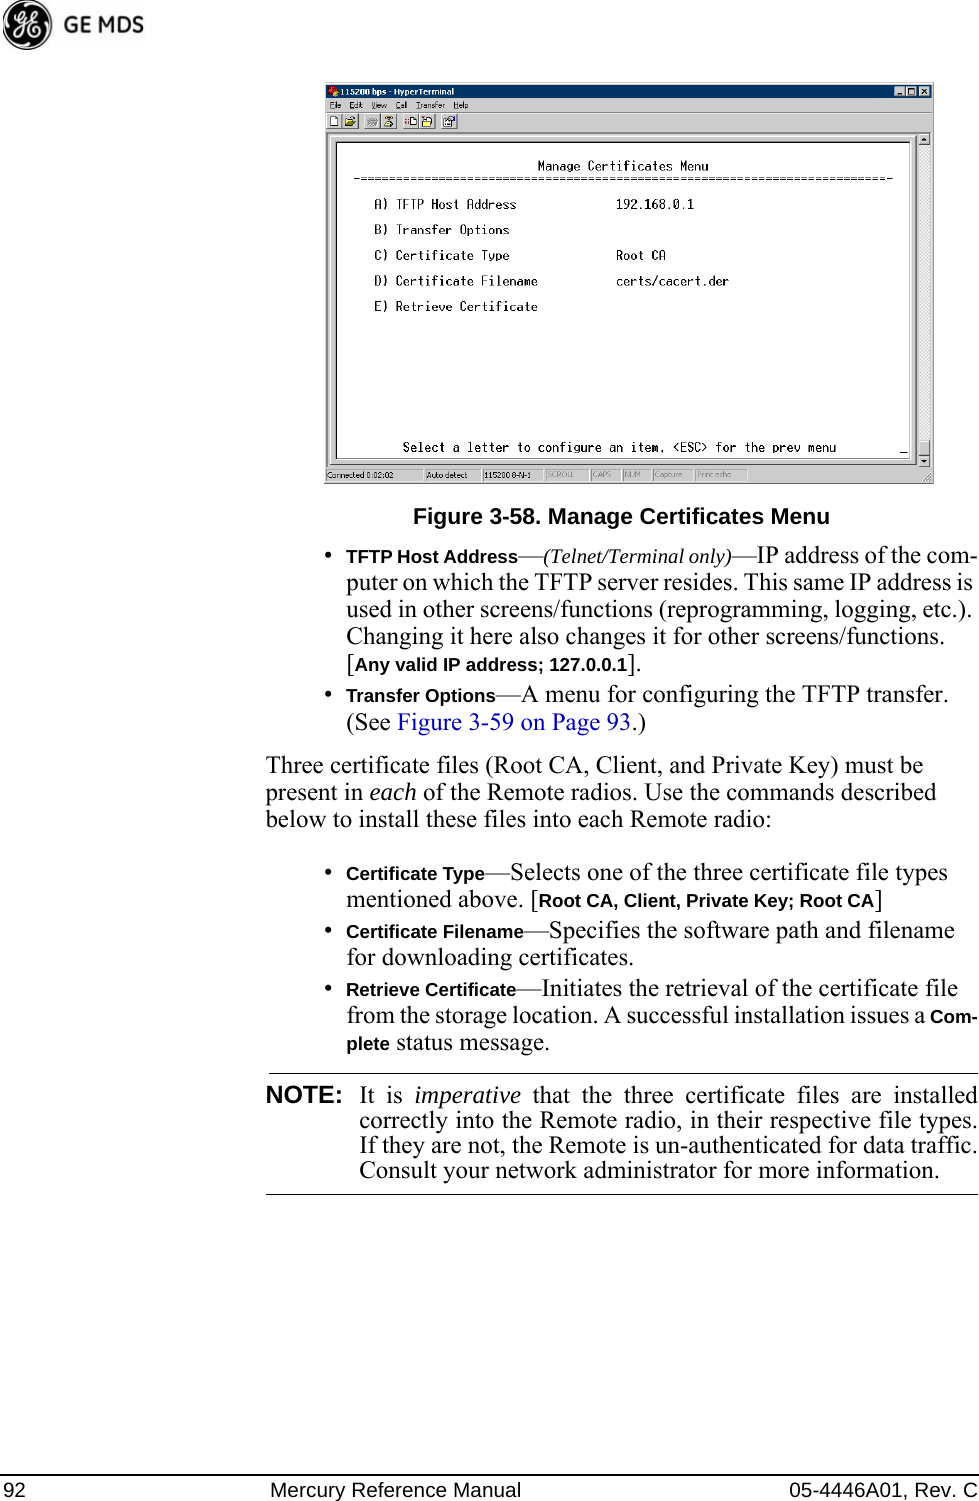 92 Mercury Reference Manual 05-4446A01, Rev. CInvisible place holderFigure 3-58. Manage Certificates Menu•TFTP Host Address—(Telnet/Terminal only)—IP address of the com-puter on which the TFTP server resides. This same IP address is used in other screens/functions (reprogramming, logging, etc.). Changing it here also changes it for other screens/functions.[Any valid IP address; 127.0.0.1].•Transfer Options—A menu for configuring the TFTP transfer. (See Figure 3-59 on Page 93.)Three certificate files (Root CA, Client, and Private Key) must be present in each of the Remote radios. Use the commands described below to install these files into each Remote radio:•Certificate Type—Selects one of the three certificate file types mentioned above. [Root CA, Client, Private Key; Root CA]•Certificate Filename—Specifies the software path and filename for downloading certificates.•Retrieve Certificate—Initiates the retrieval of the certificate file from the storage location. A successful installation issues a Com-plete status message.NOTE: It is imperative that the three certificate files are installedcorrectly into the Remote radio, in their respective file types.If they are not, the Remote is un-authenticated for data traffic.Consult your network administrator for more information.